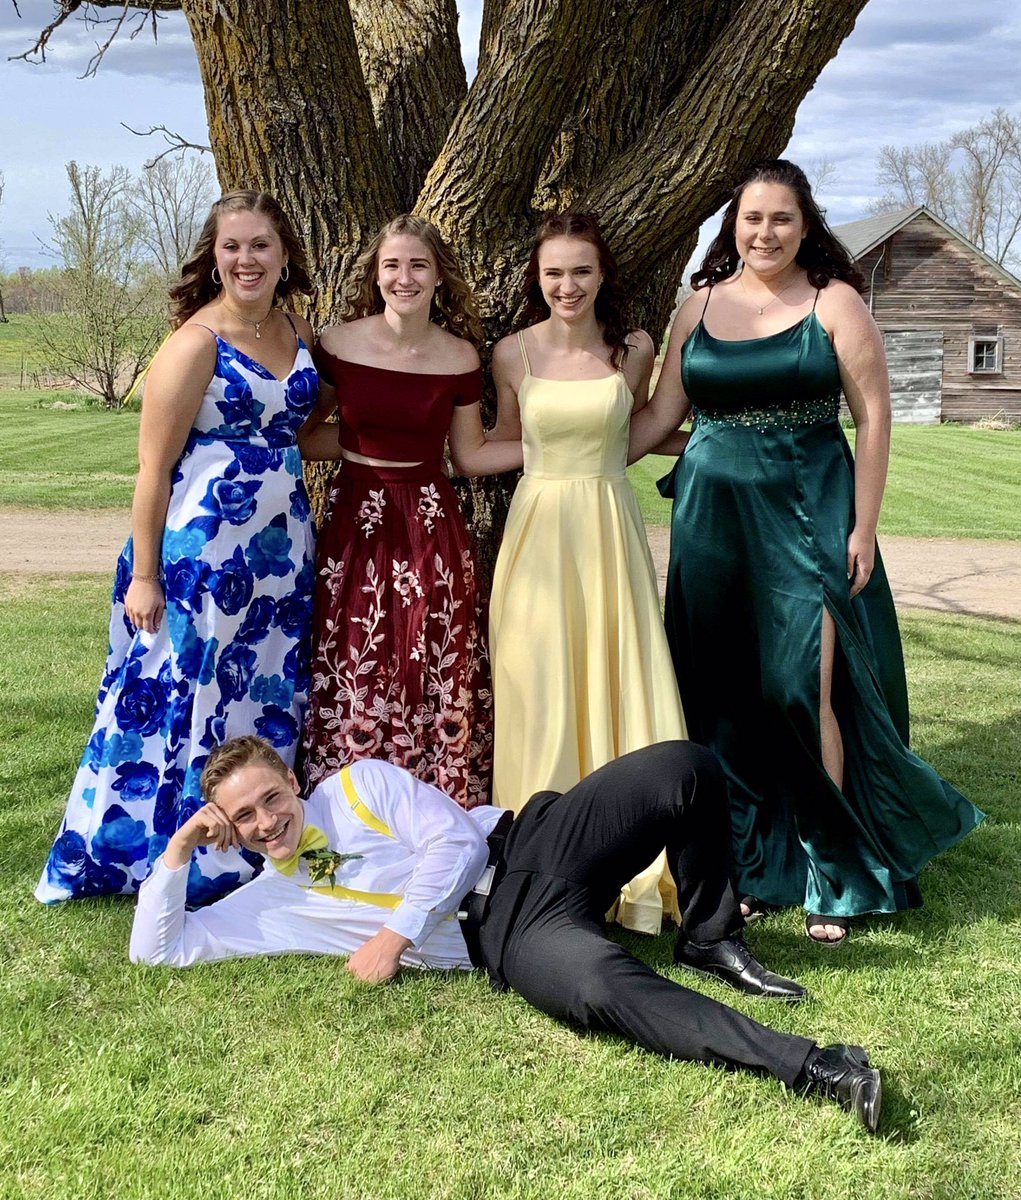 Obviously my son had a serious problem being the only boy in the group photos for their Prom pod. 😏😉😂 #MoraProm2021